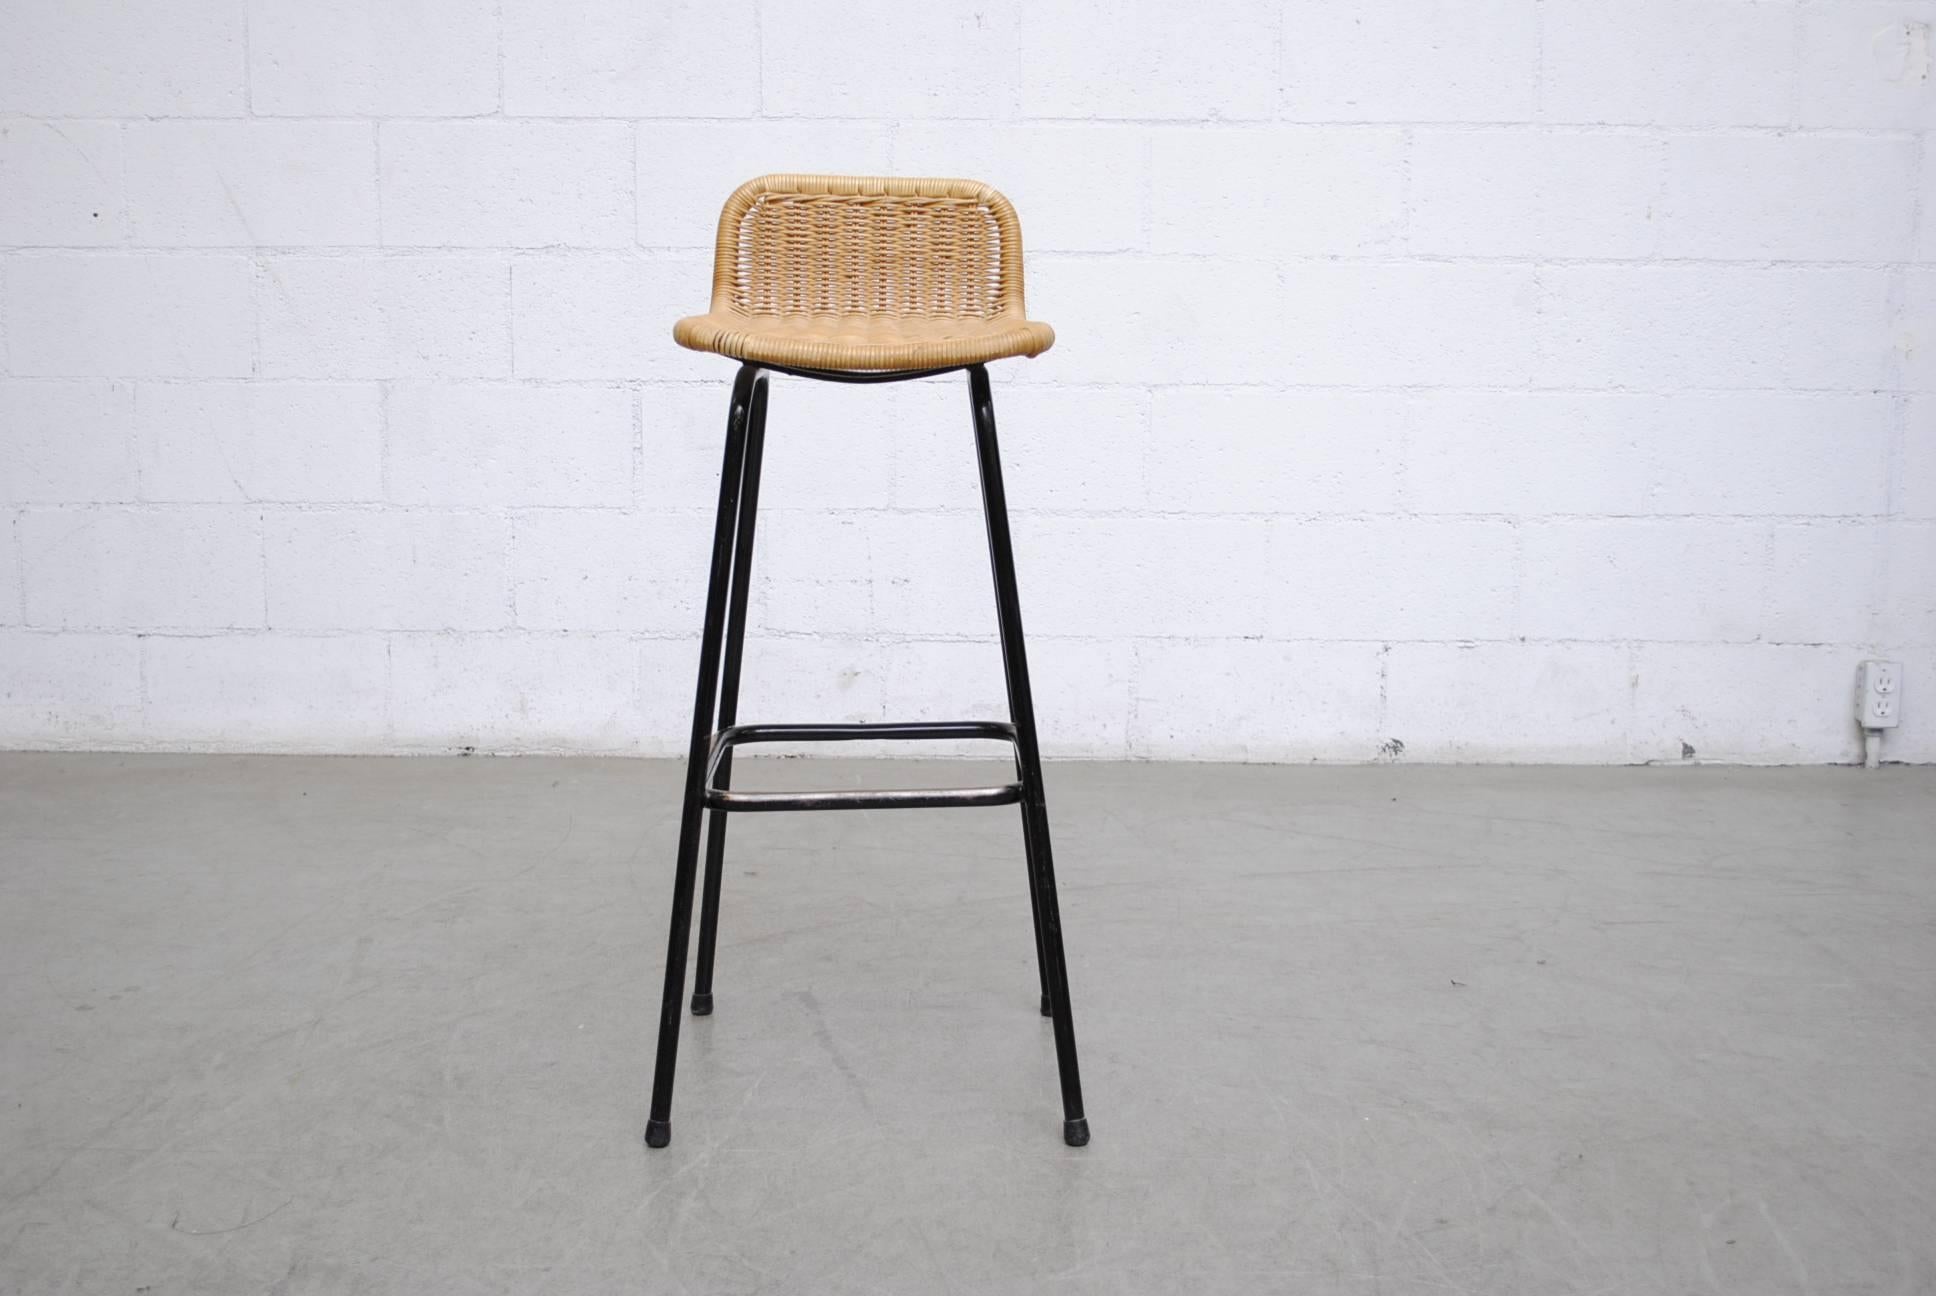 Charlotte Perriand style bar stools with woven rattan seating with black enameled tubular frame, in original condition with visible signs of wear. Other similar stools available but listed separately